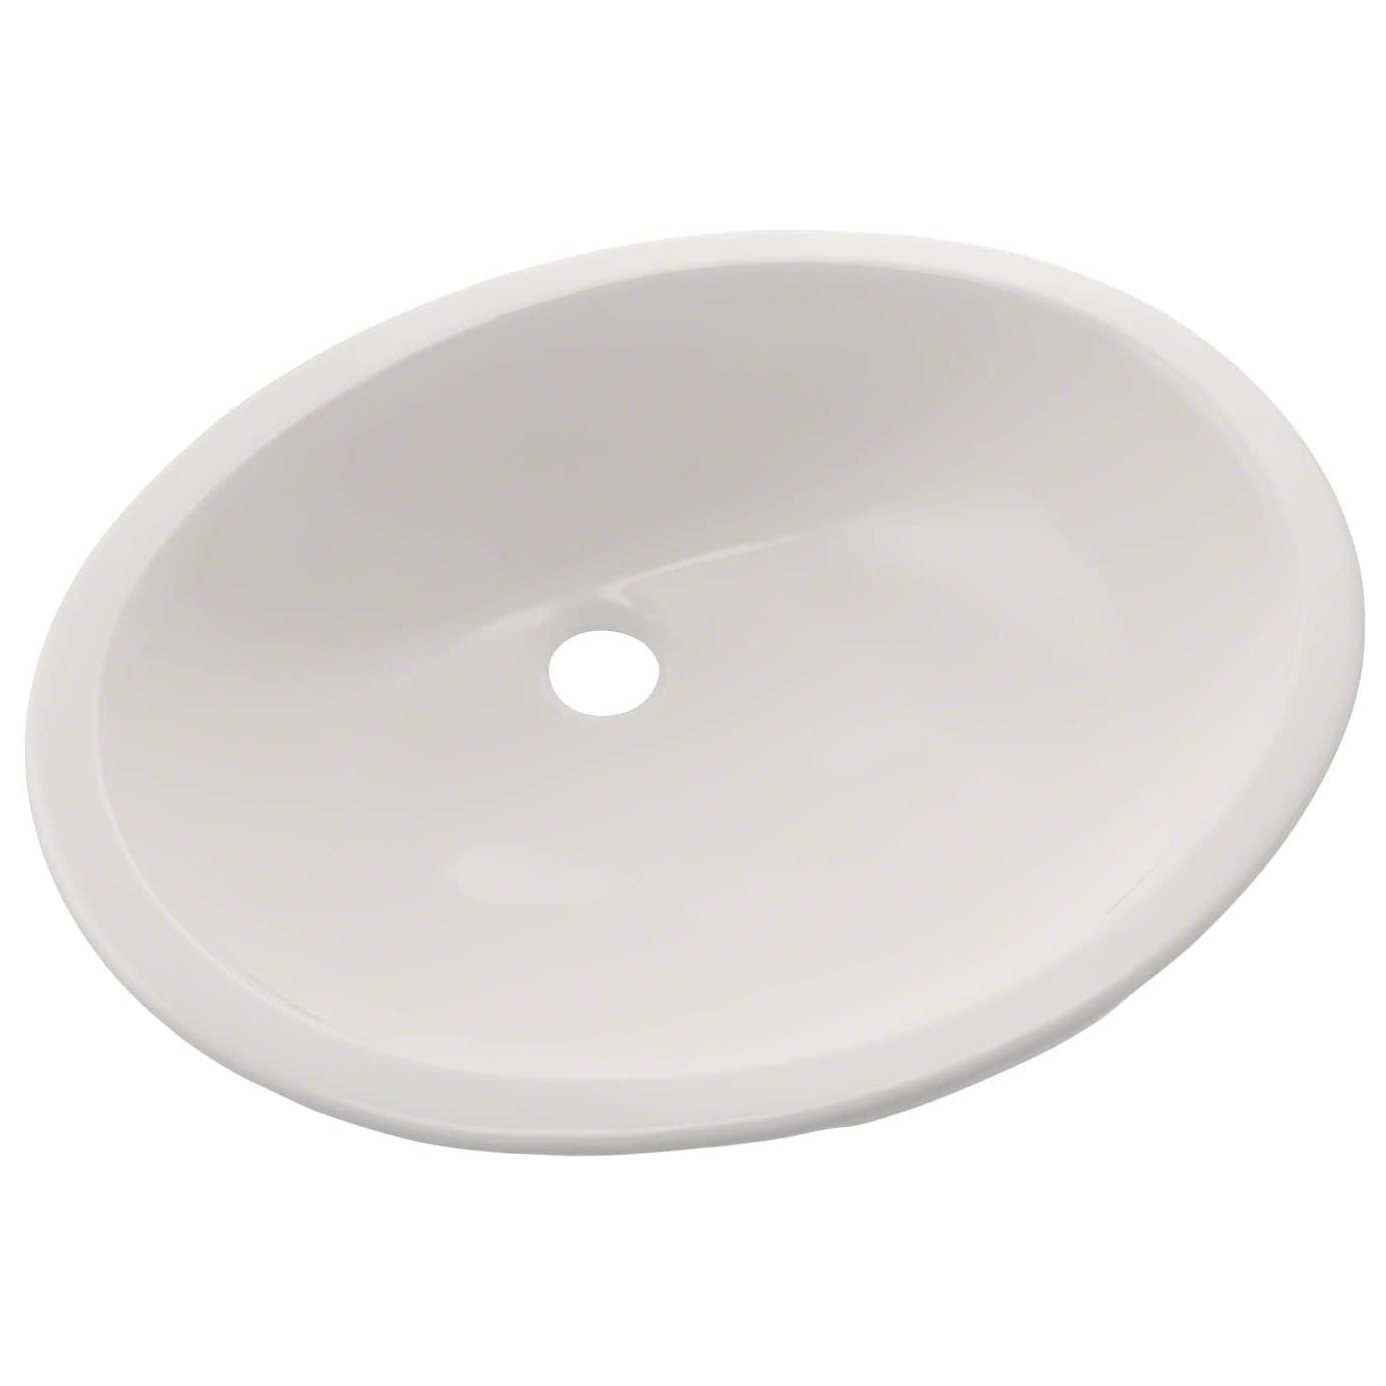 Rendezvous 17x14" Undermount Lav Sink in Colonial White